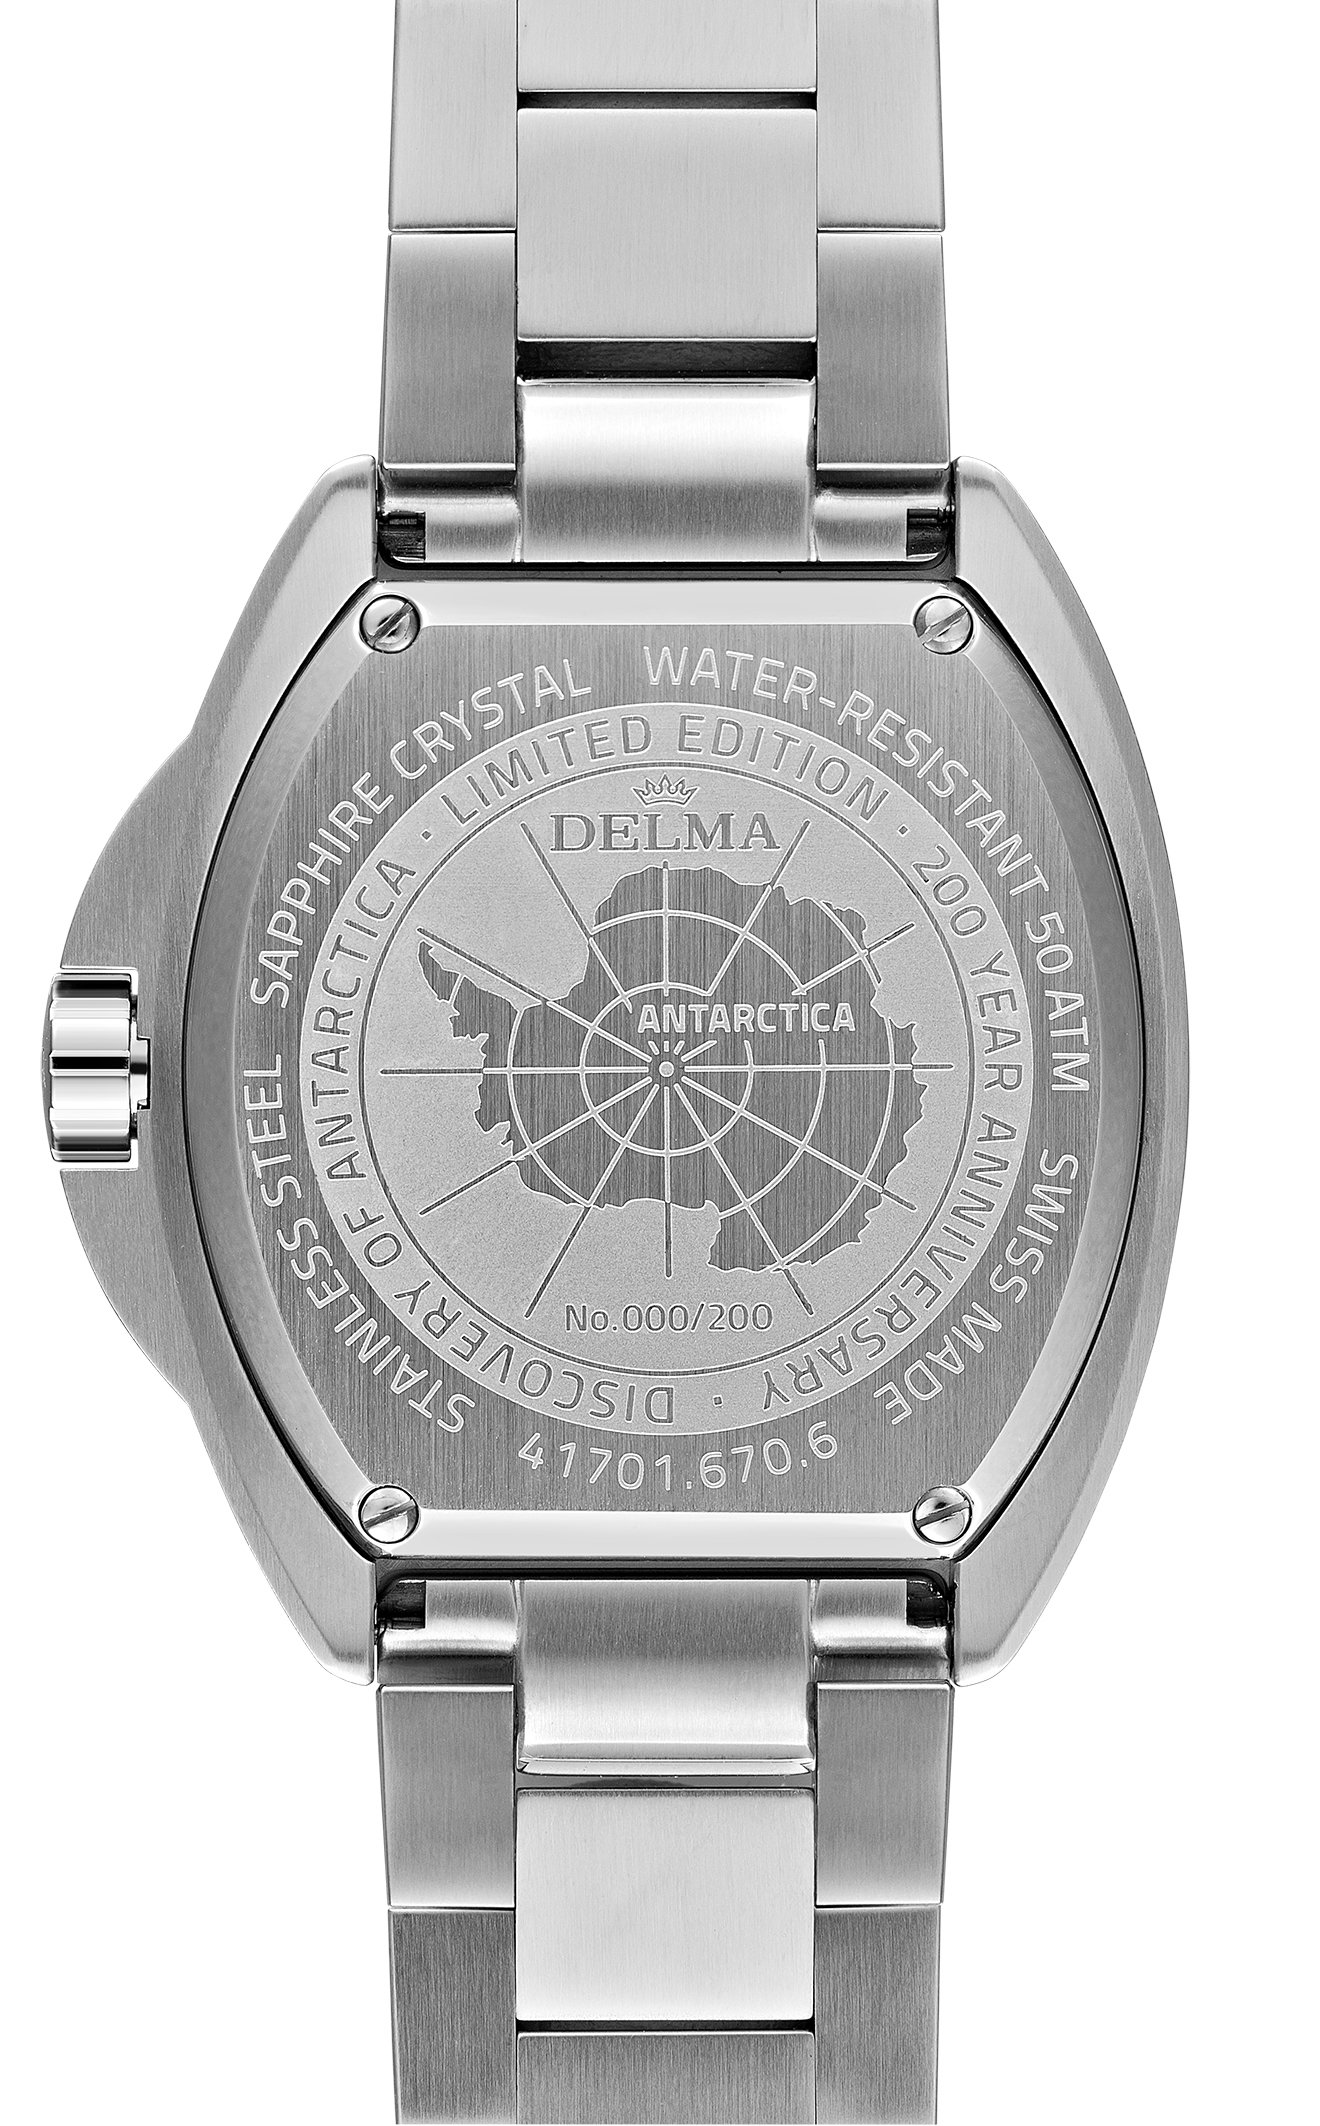 Watch Case back with special engraving of Antarctica